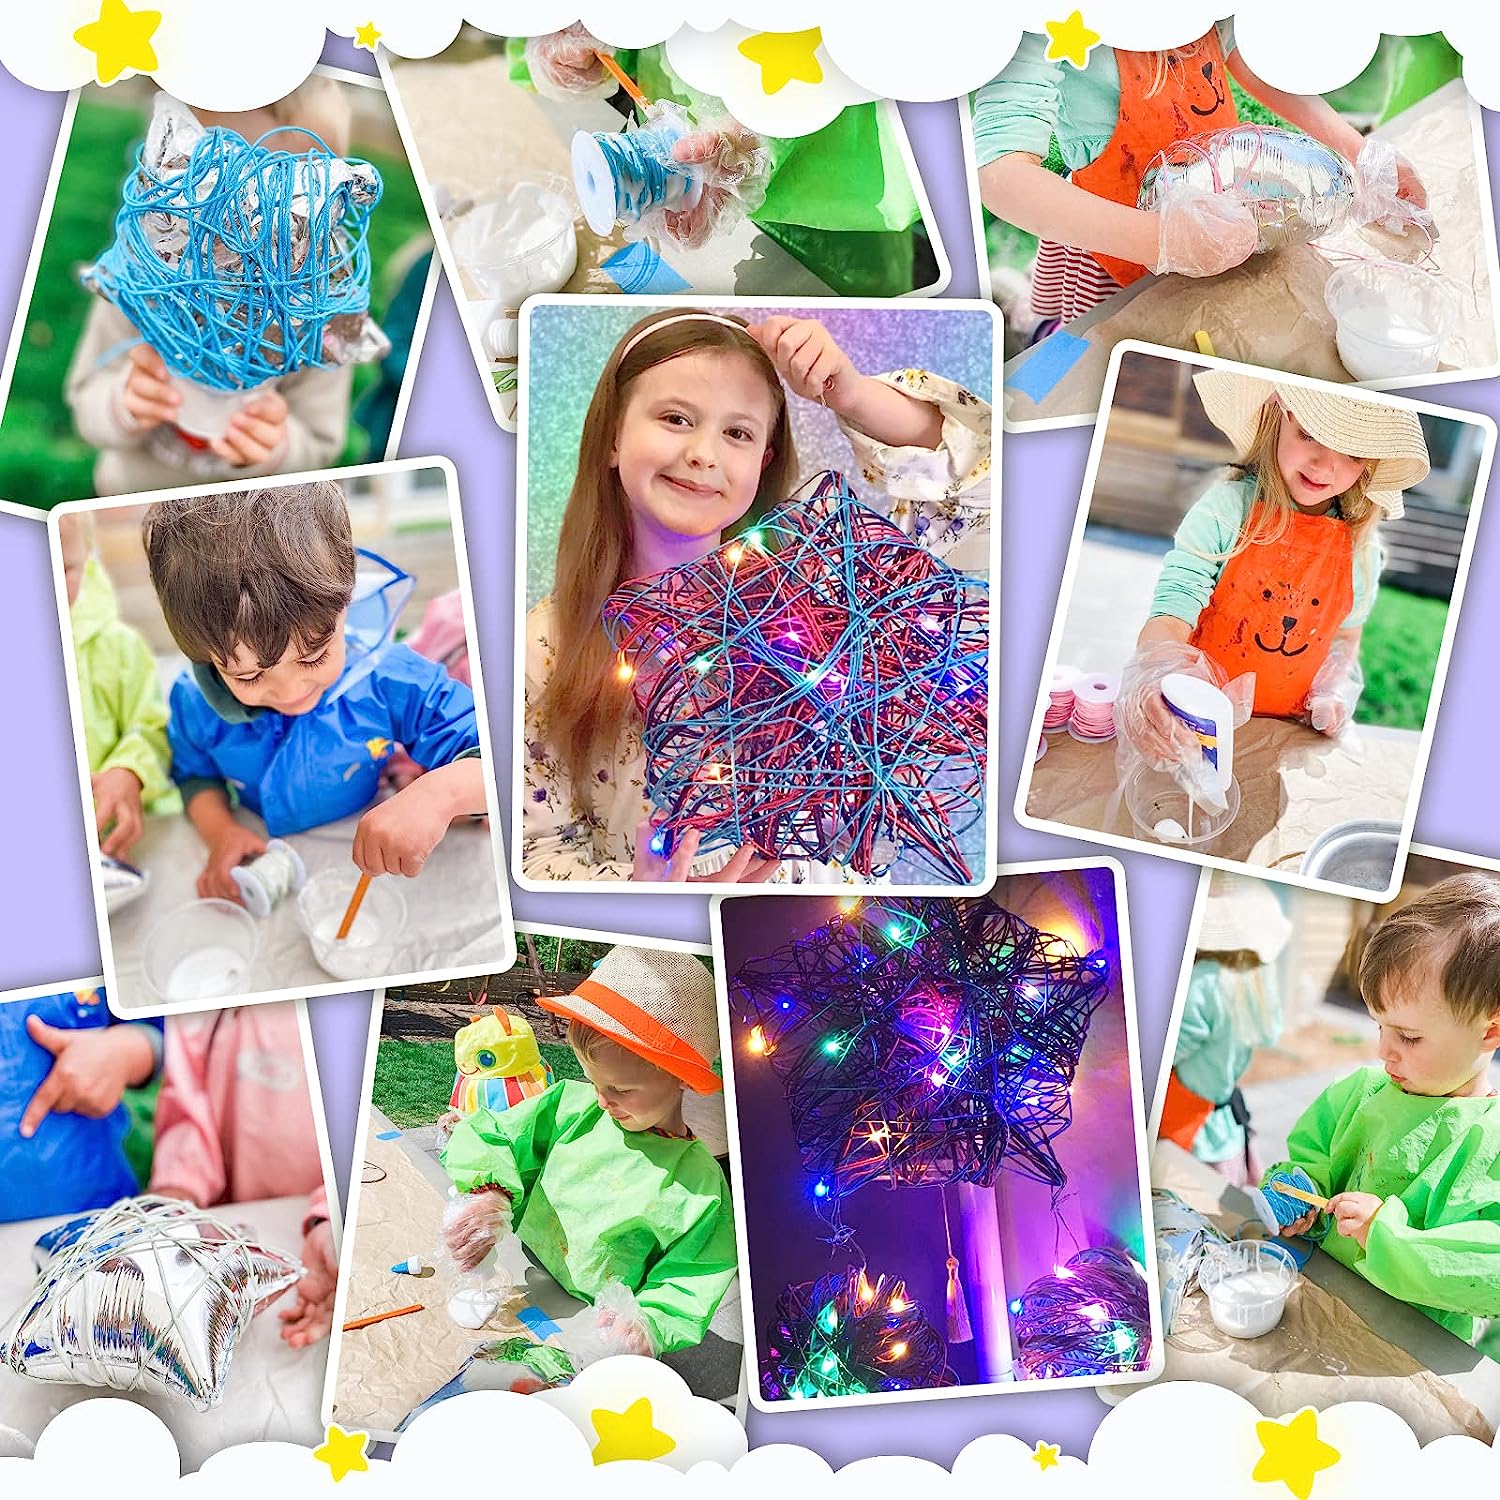  3D String Craft Kit for Kids, DIY Owl Craft Toys with  Multi-Colored LED Light, Arts and Crafts for Girls Ages 8-12 Year Old, Arts  & Craft Kits Toys for 8, 9